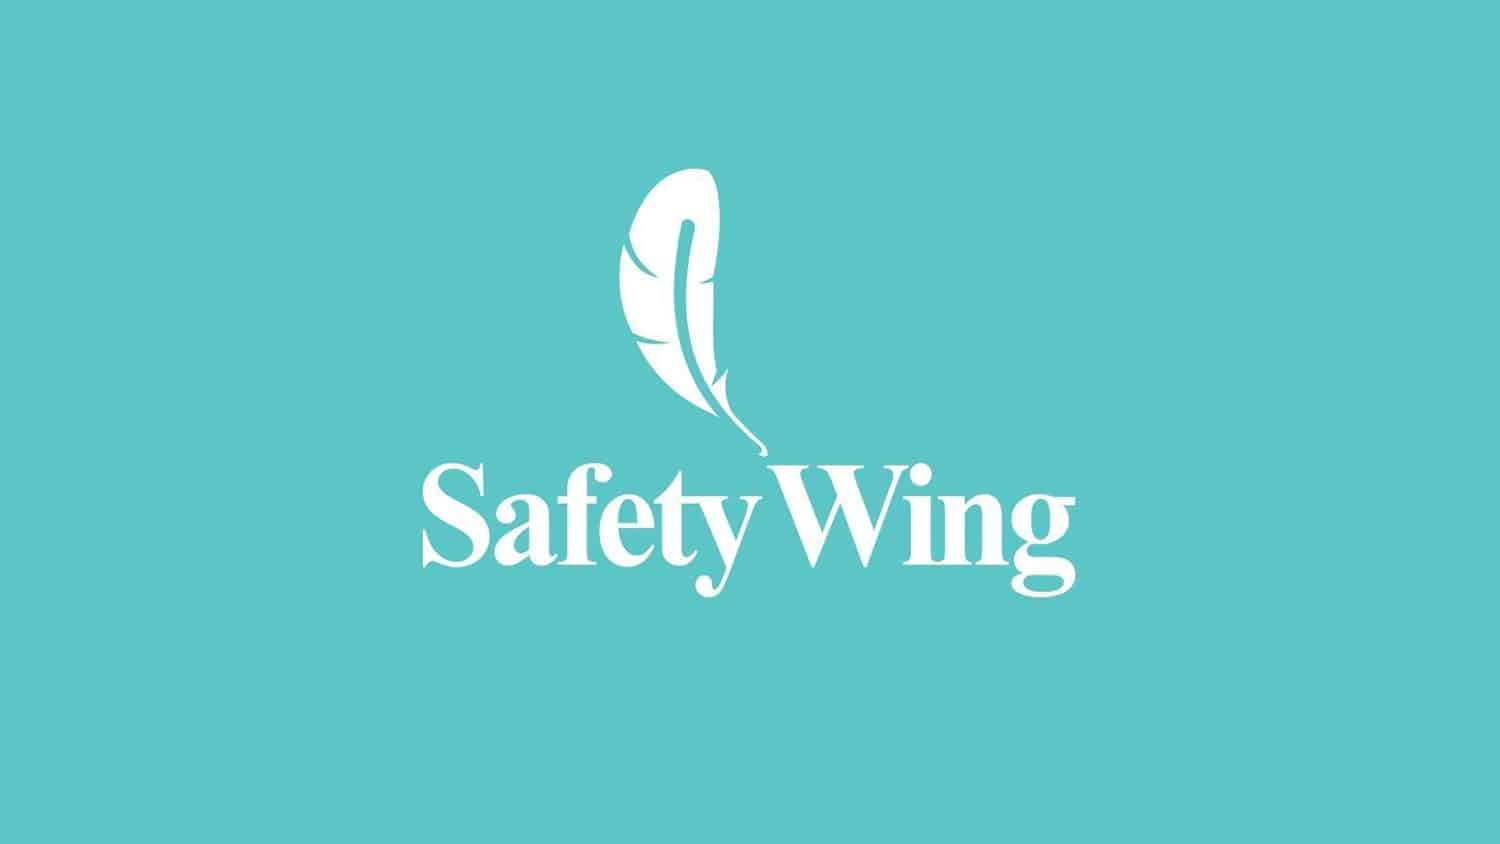 SafetyWing: A travel and medical incident insurance built specifically for digital nomads.